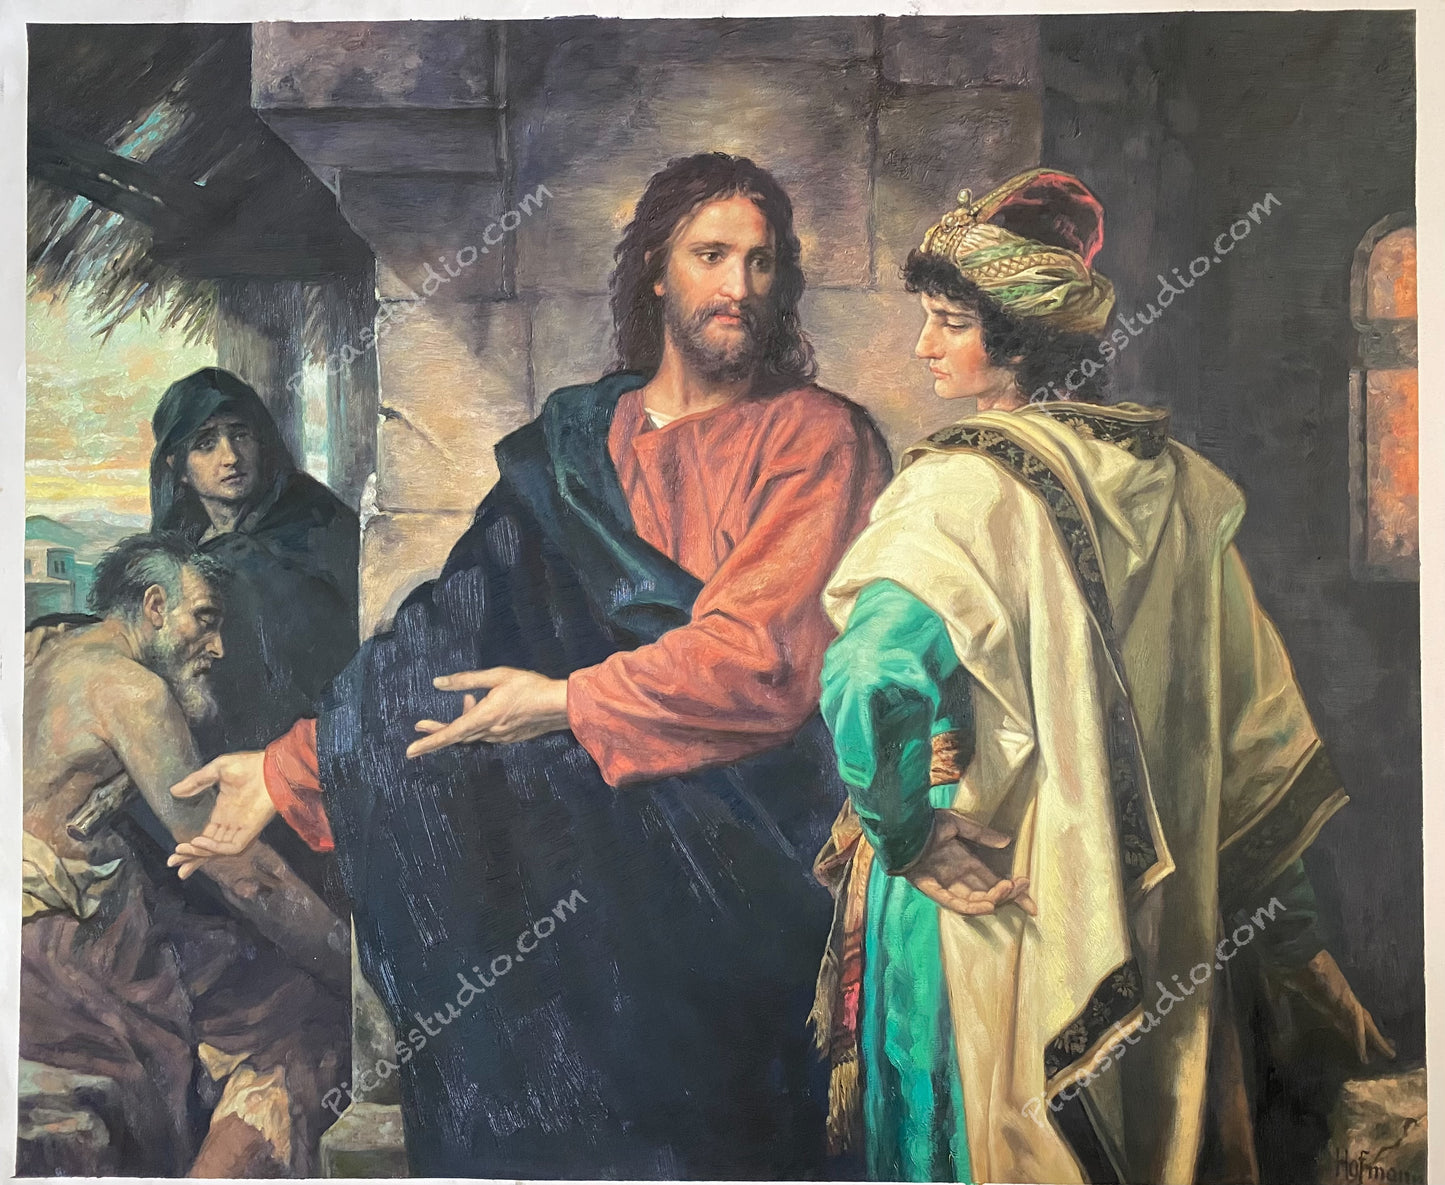 Christ and the Rich Young Ruler, by Heinrich Hofmann Portrait Oil Painting Hand Painted Art on Canvas Wall Decor Unframed